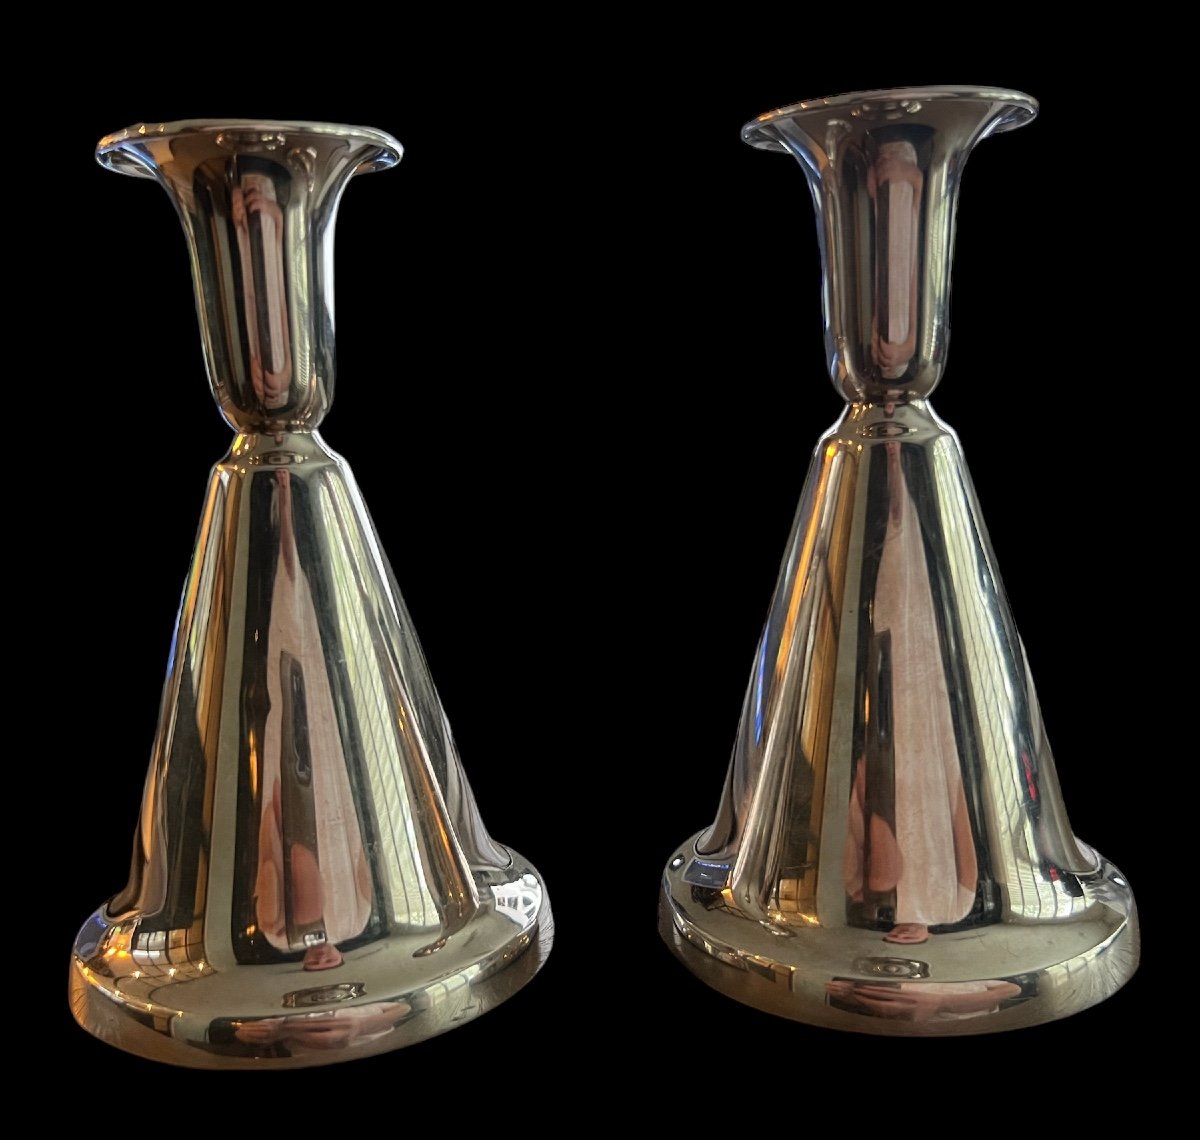 Pair Of Candlesticks In Sterling Silver By Thorvald Marthinsen - Tonsberg (norway) - 1900-1925